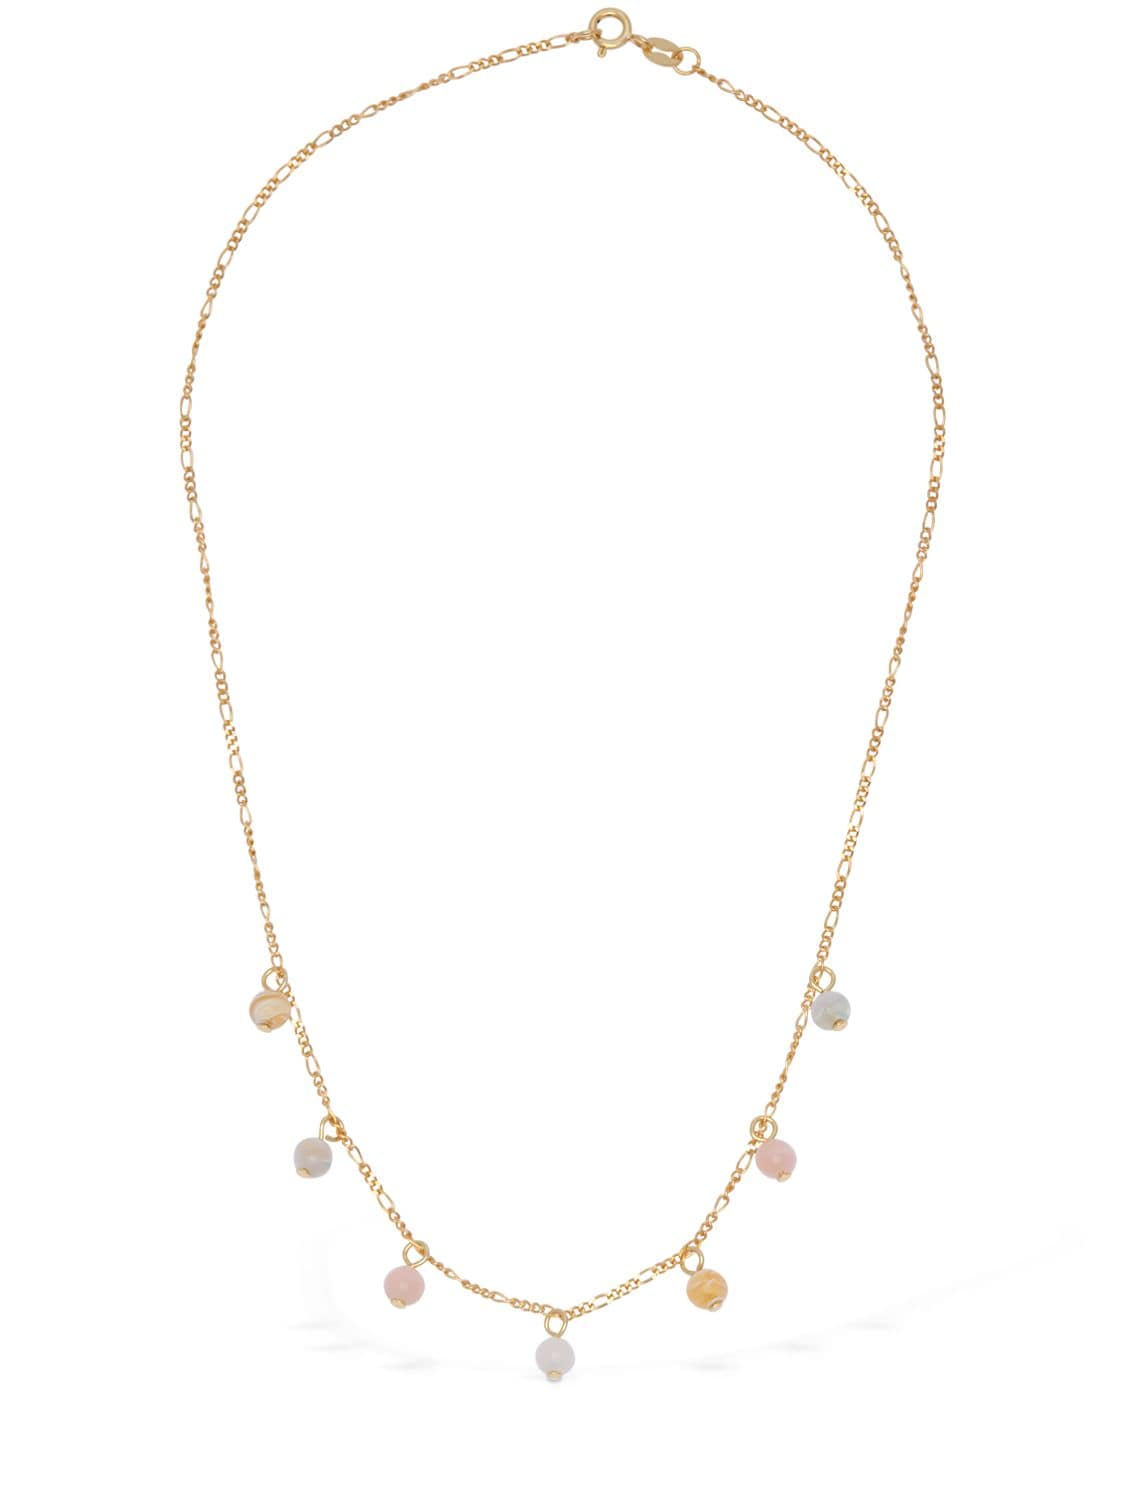 Aym 40cm Margot Bead Necklace In Gold,multi